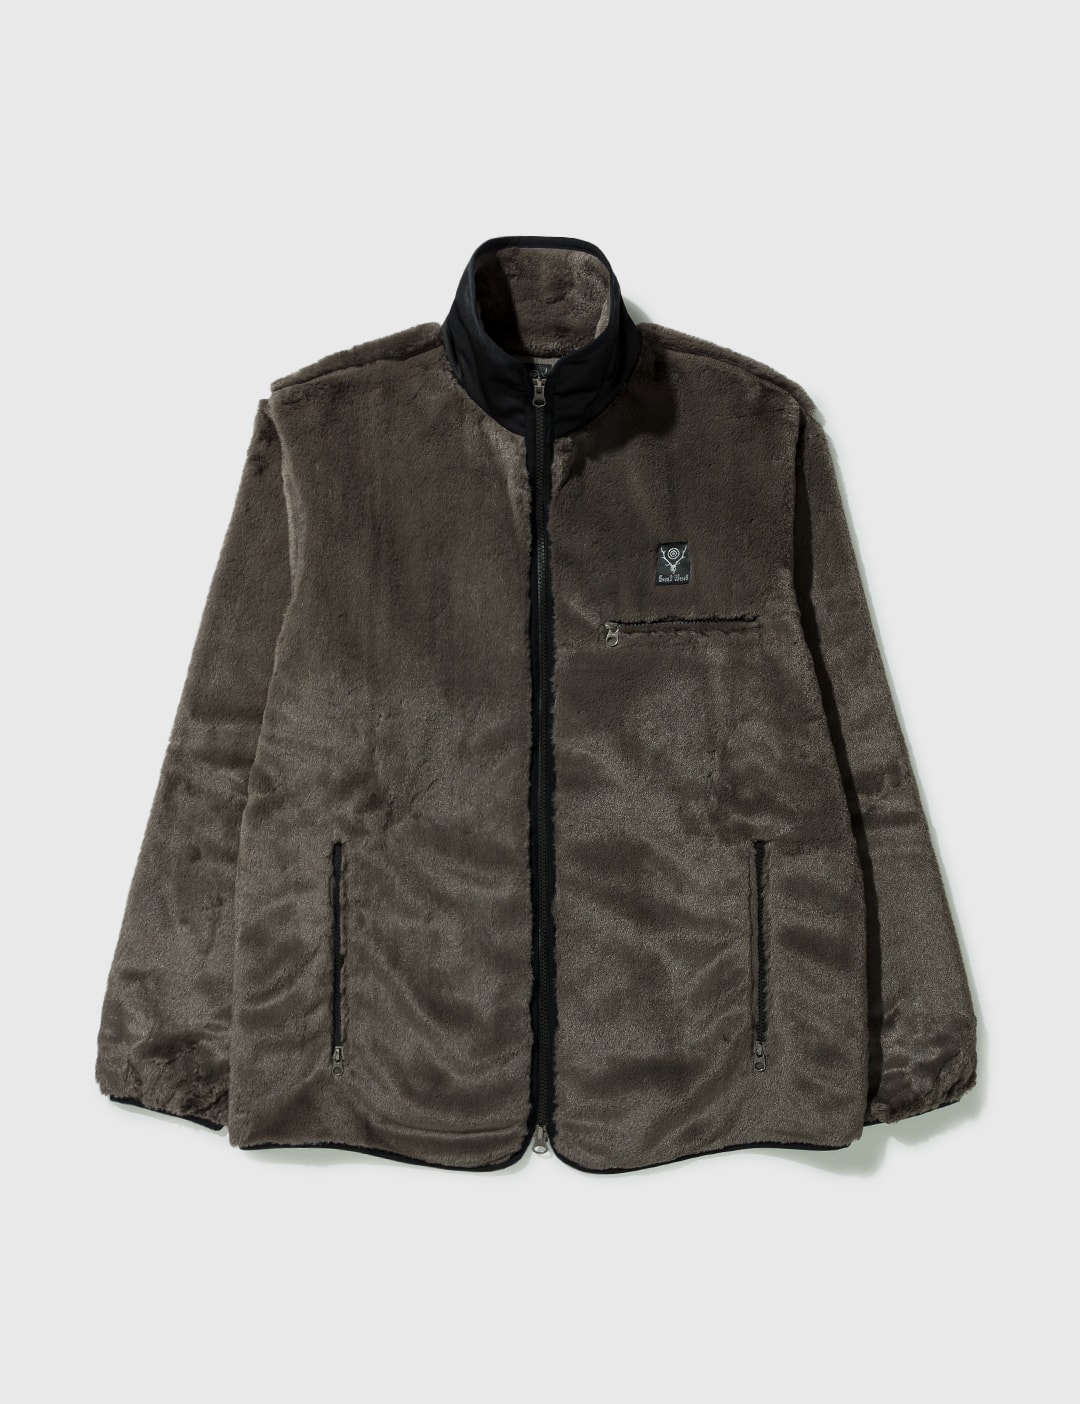 South2 West8 Hypebeast | Globally - Fashion and Piping HBX Jacket - by Lifestyle Curated